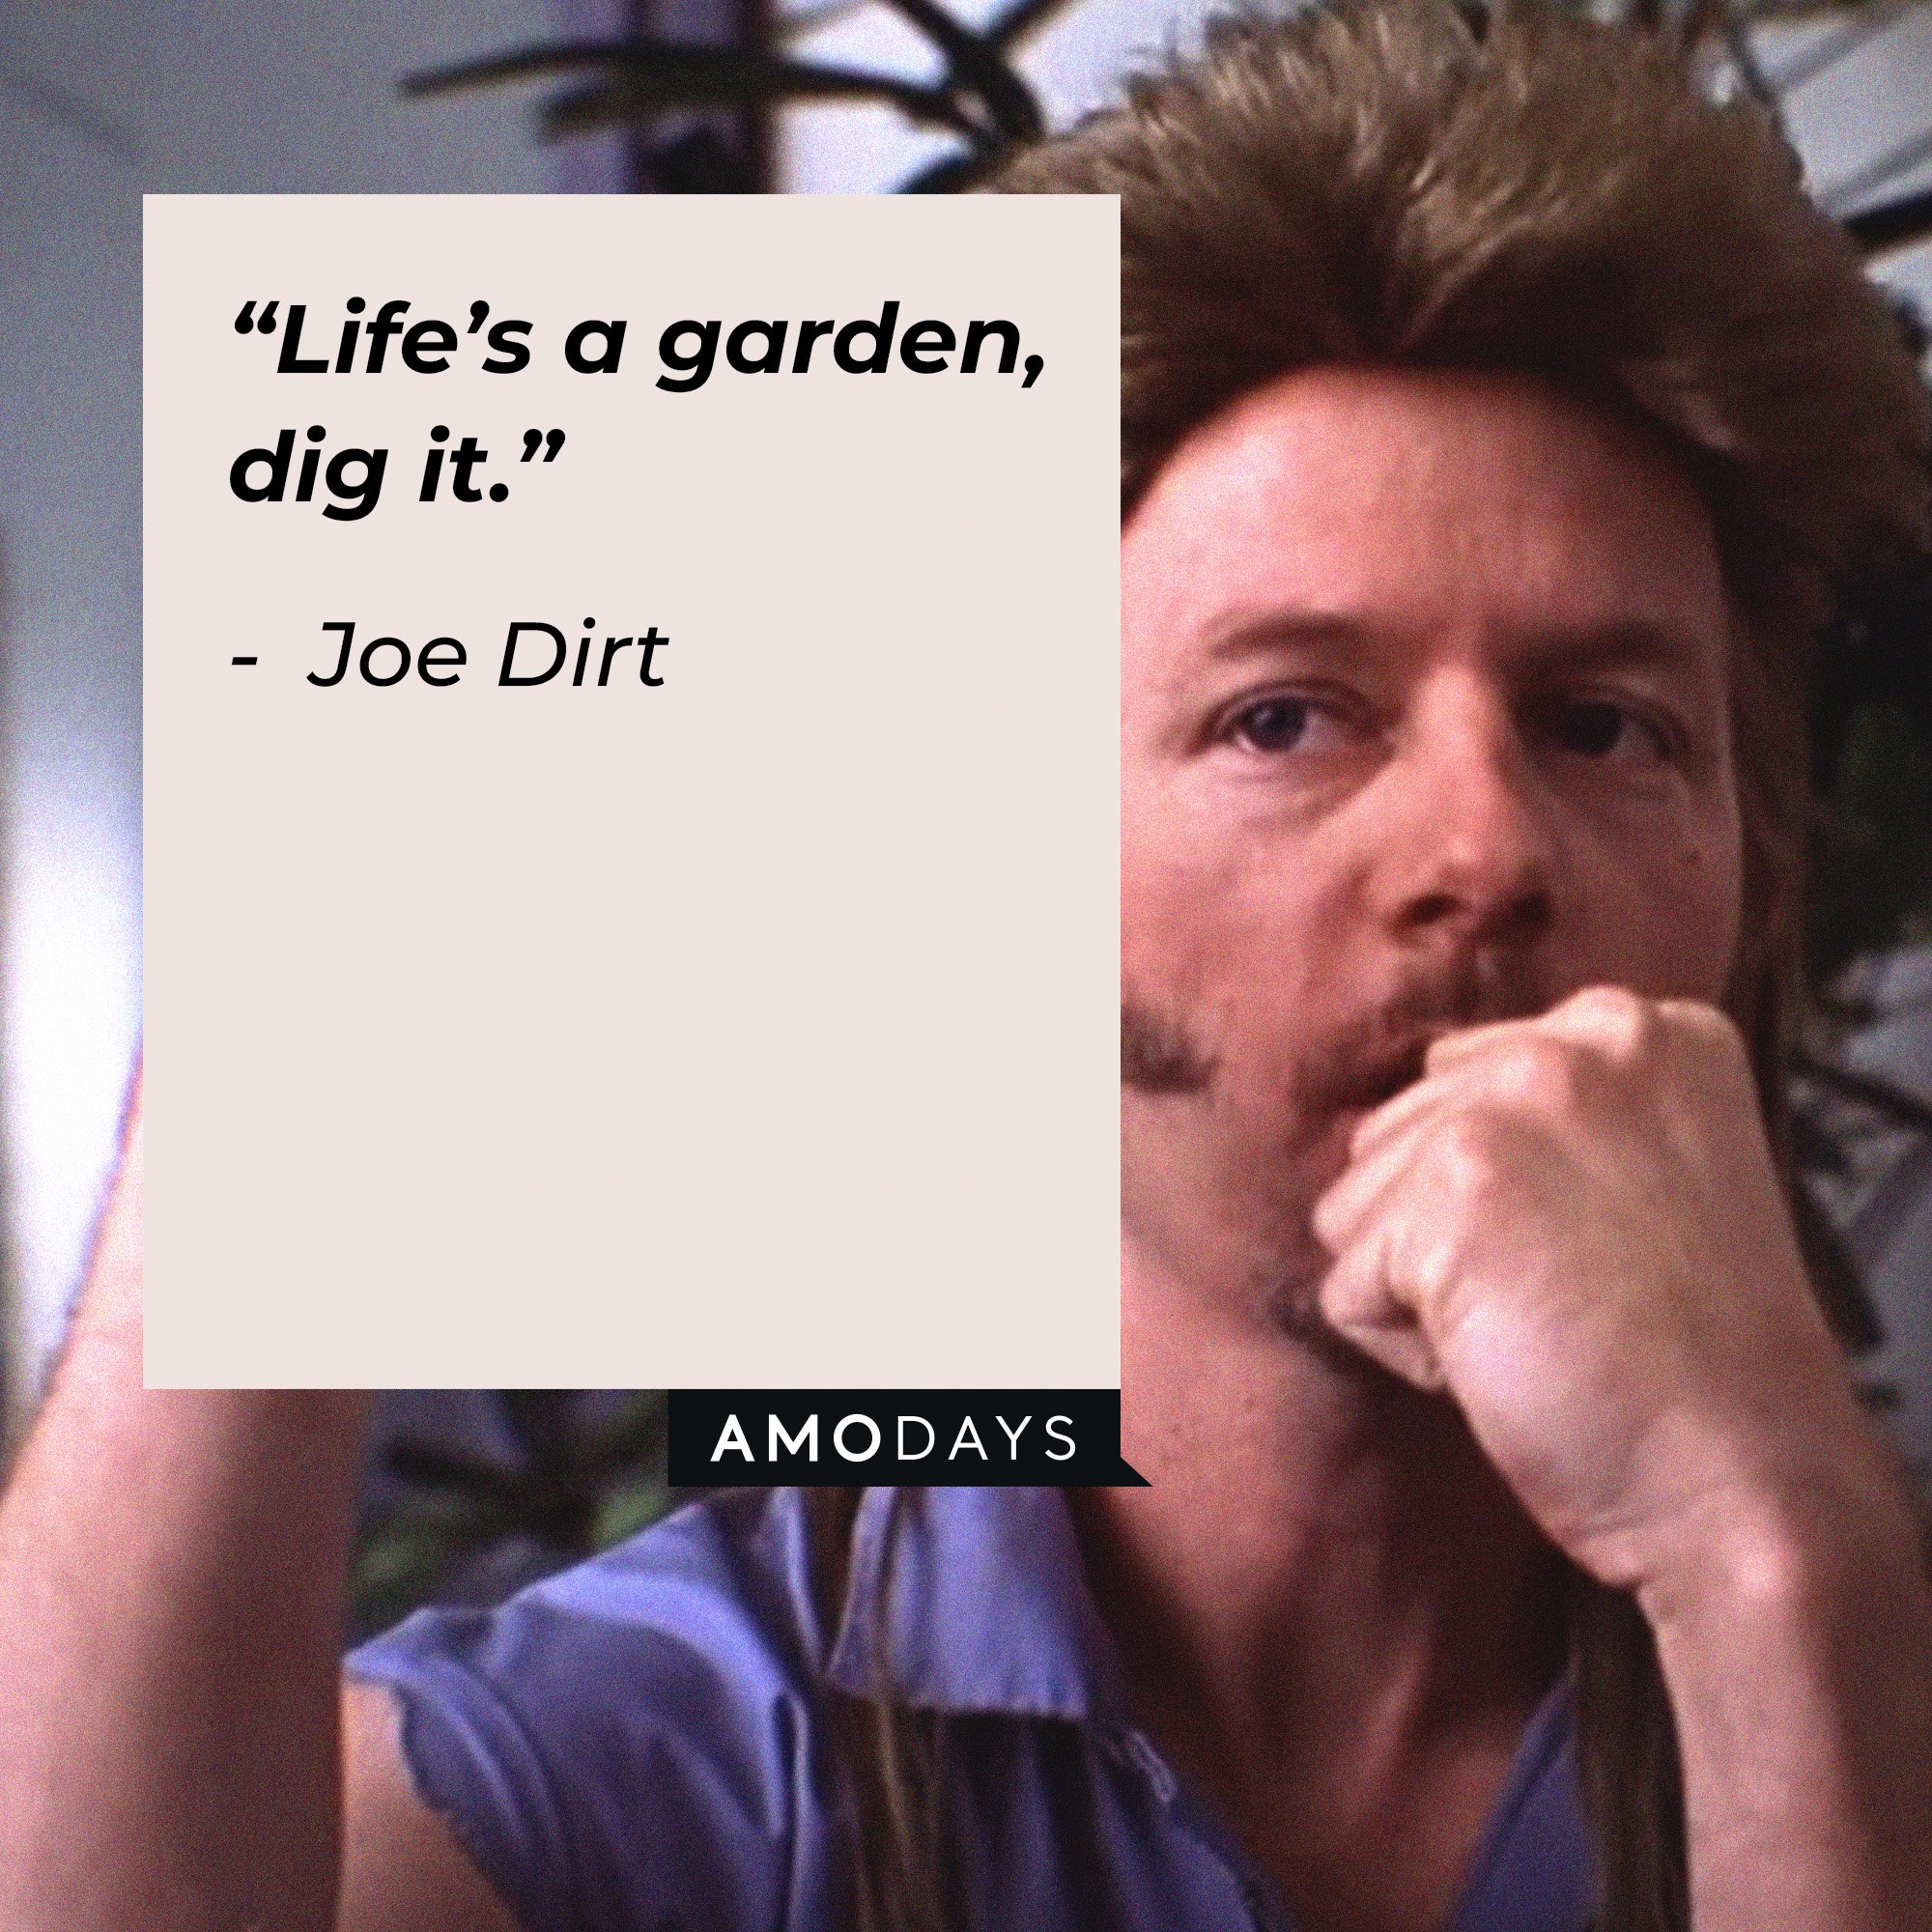 Joe Dirt's quote: “Life’s a garden, dig it.” | Image: AmoDays